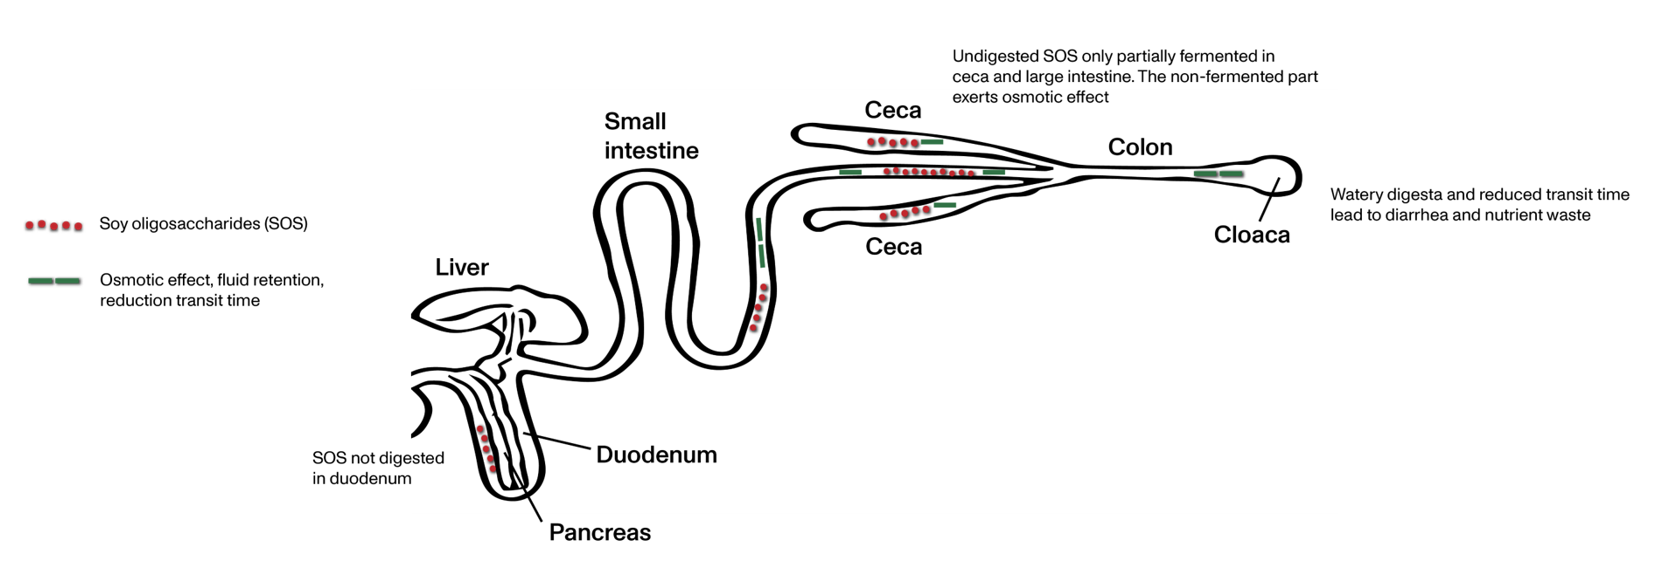 Figure 2. Soy α-galactosides or oligosaccherides move through the digestive tract exerting an osmotic effect